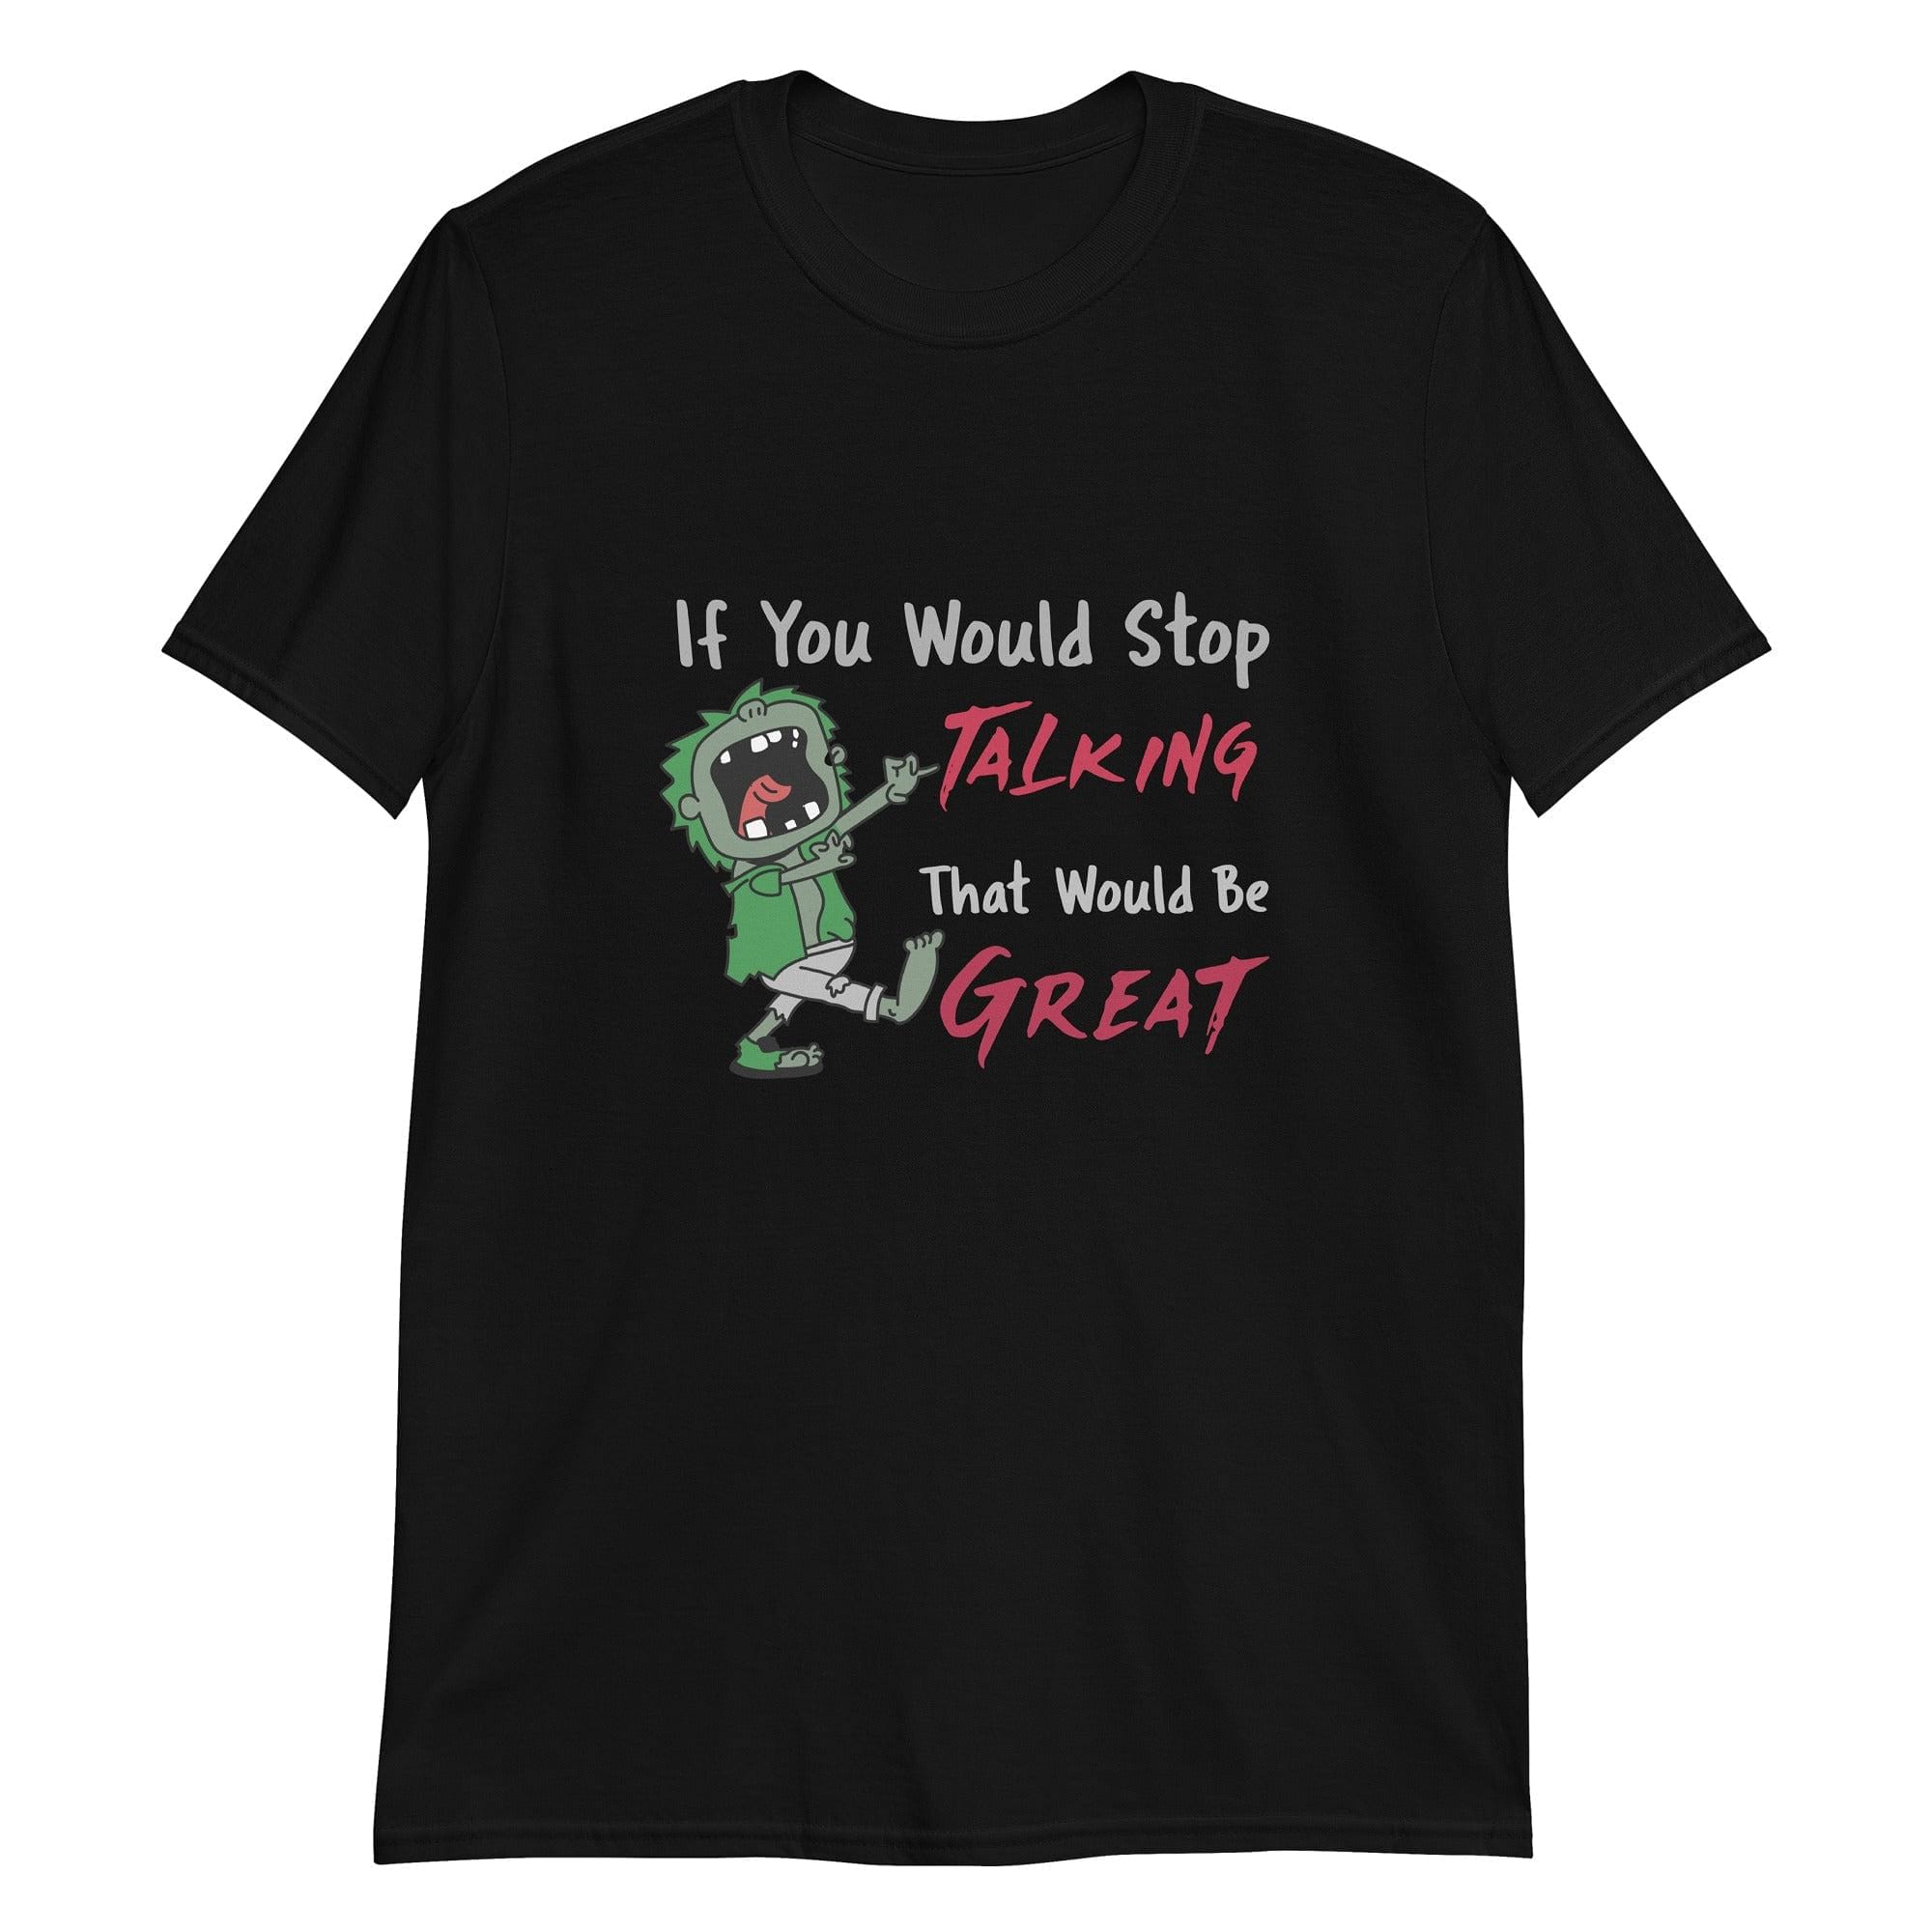 If You Would Stop Talking – T-Shirt